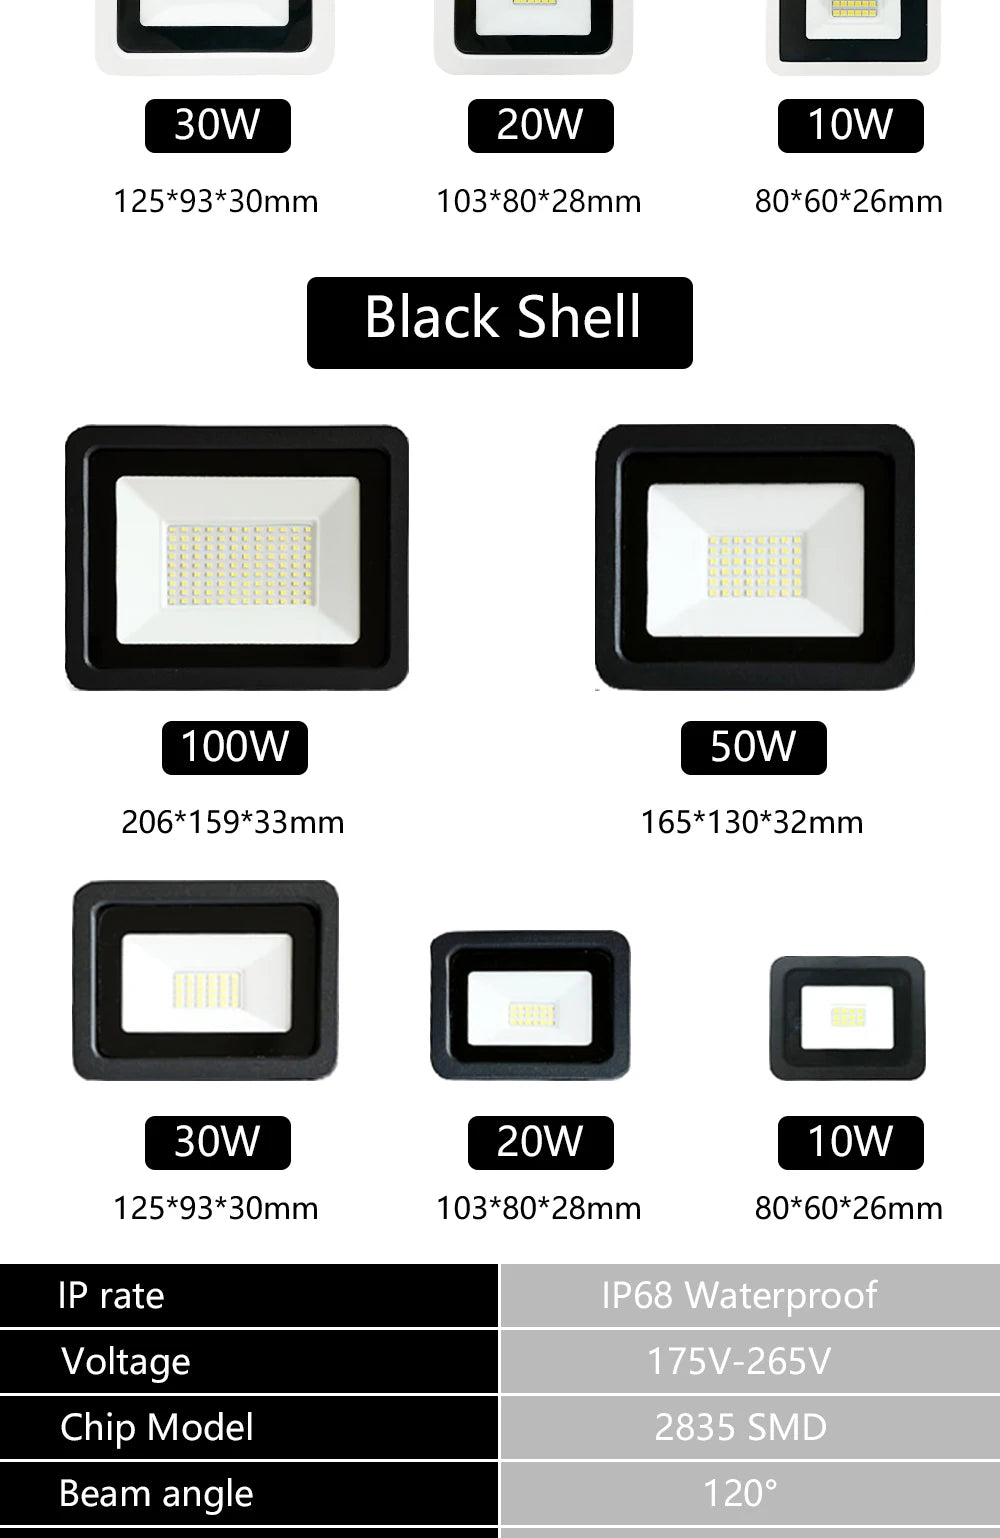 Modern LED flood light with IP68 waterproof protection, suitable for outdoor use.